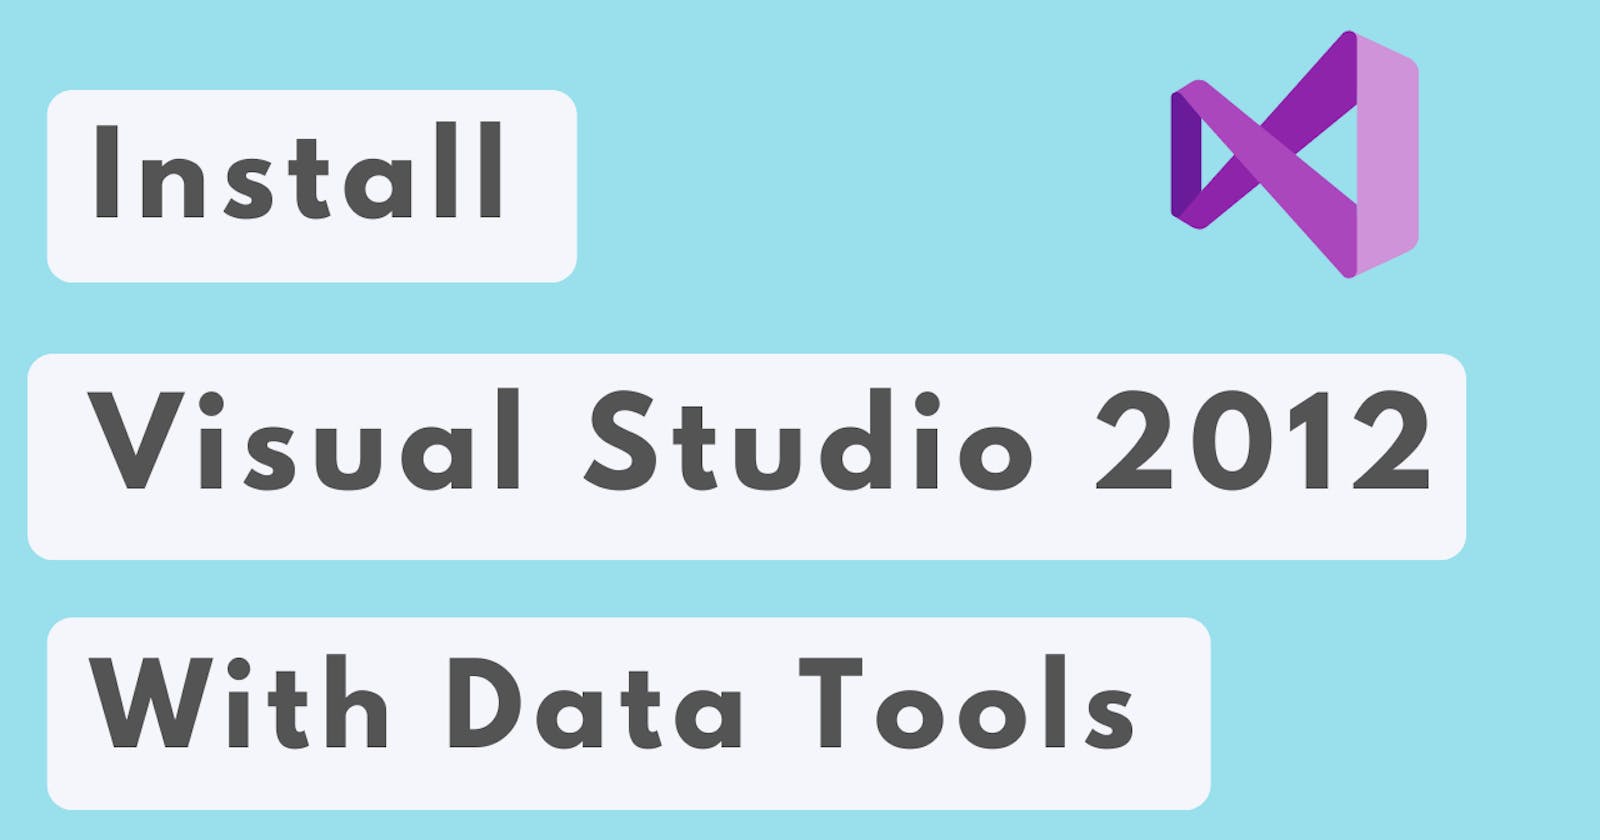 Install Visual Studio 2012 With Data Tools